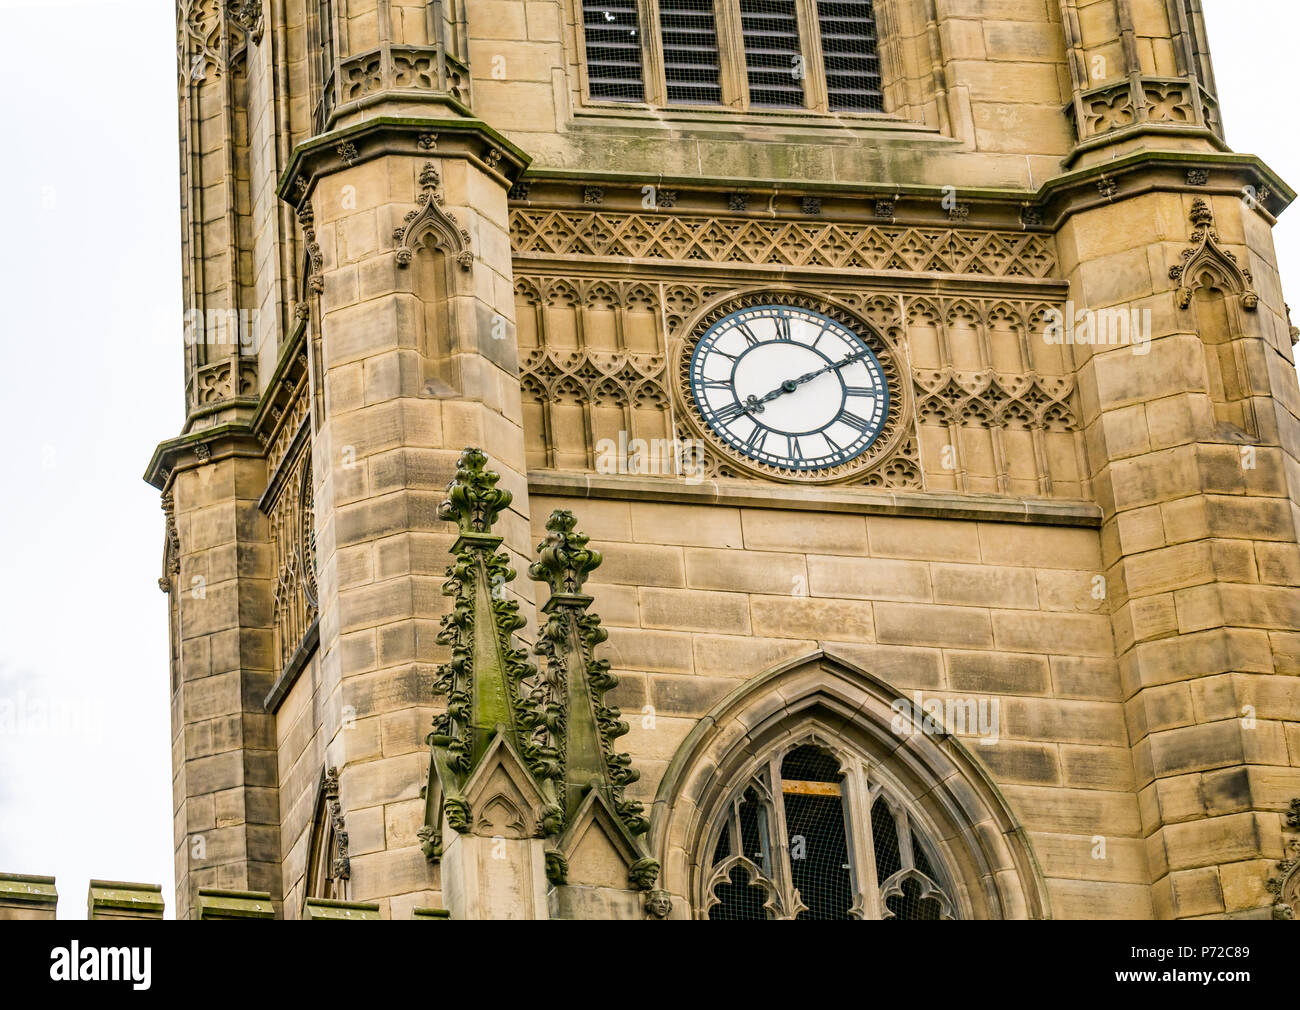 Close up view of St Luke's Bombed Out Church clock tower, Liverpool, England, UK, damaged by a bomb in World War II, now a ruin Stock Photo